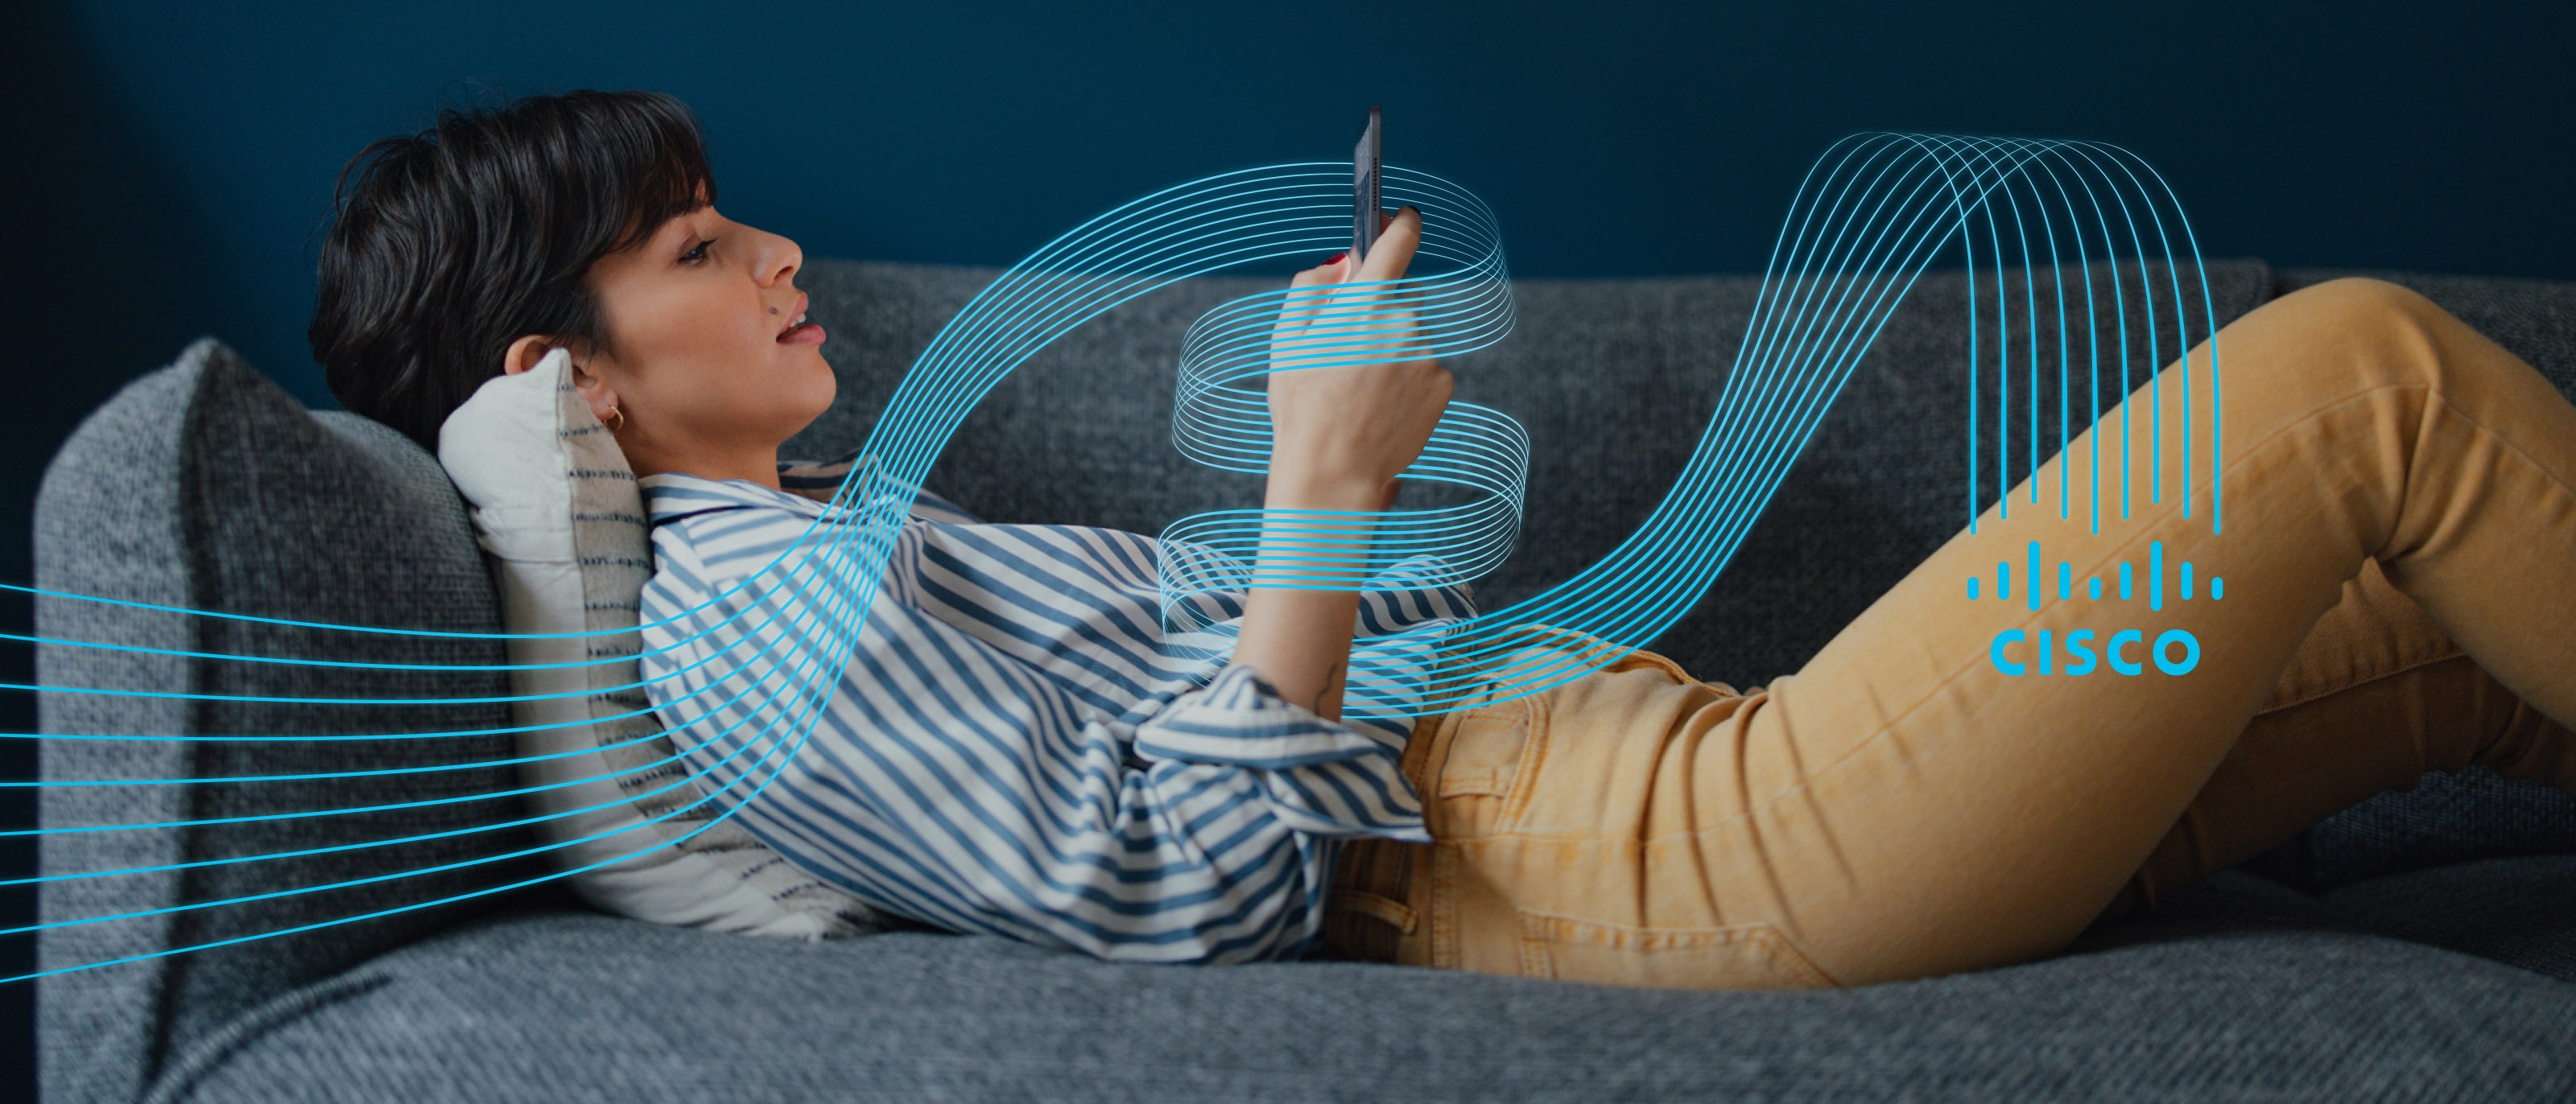 Woman laying on a gray couch in front of a dark blue wall holding cell phone wrapped in Cisco logo